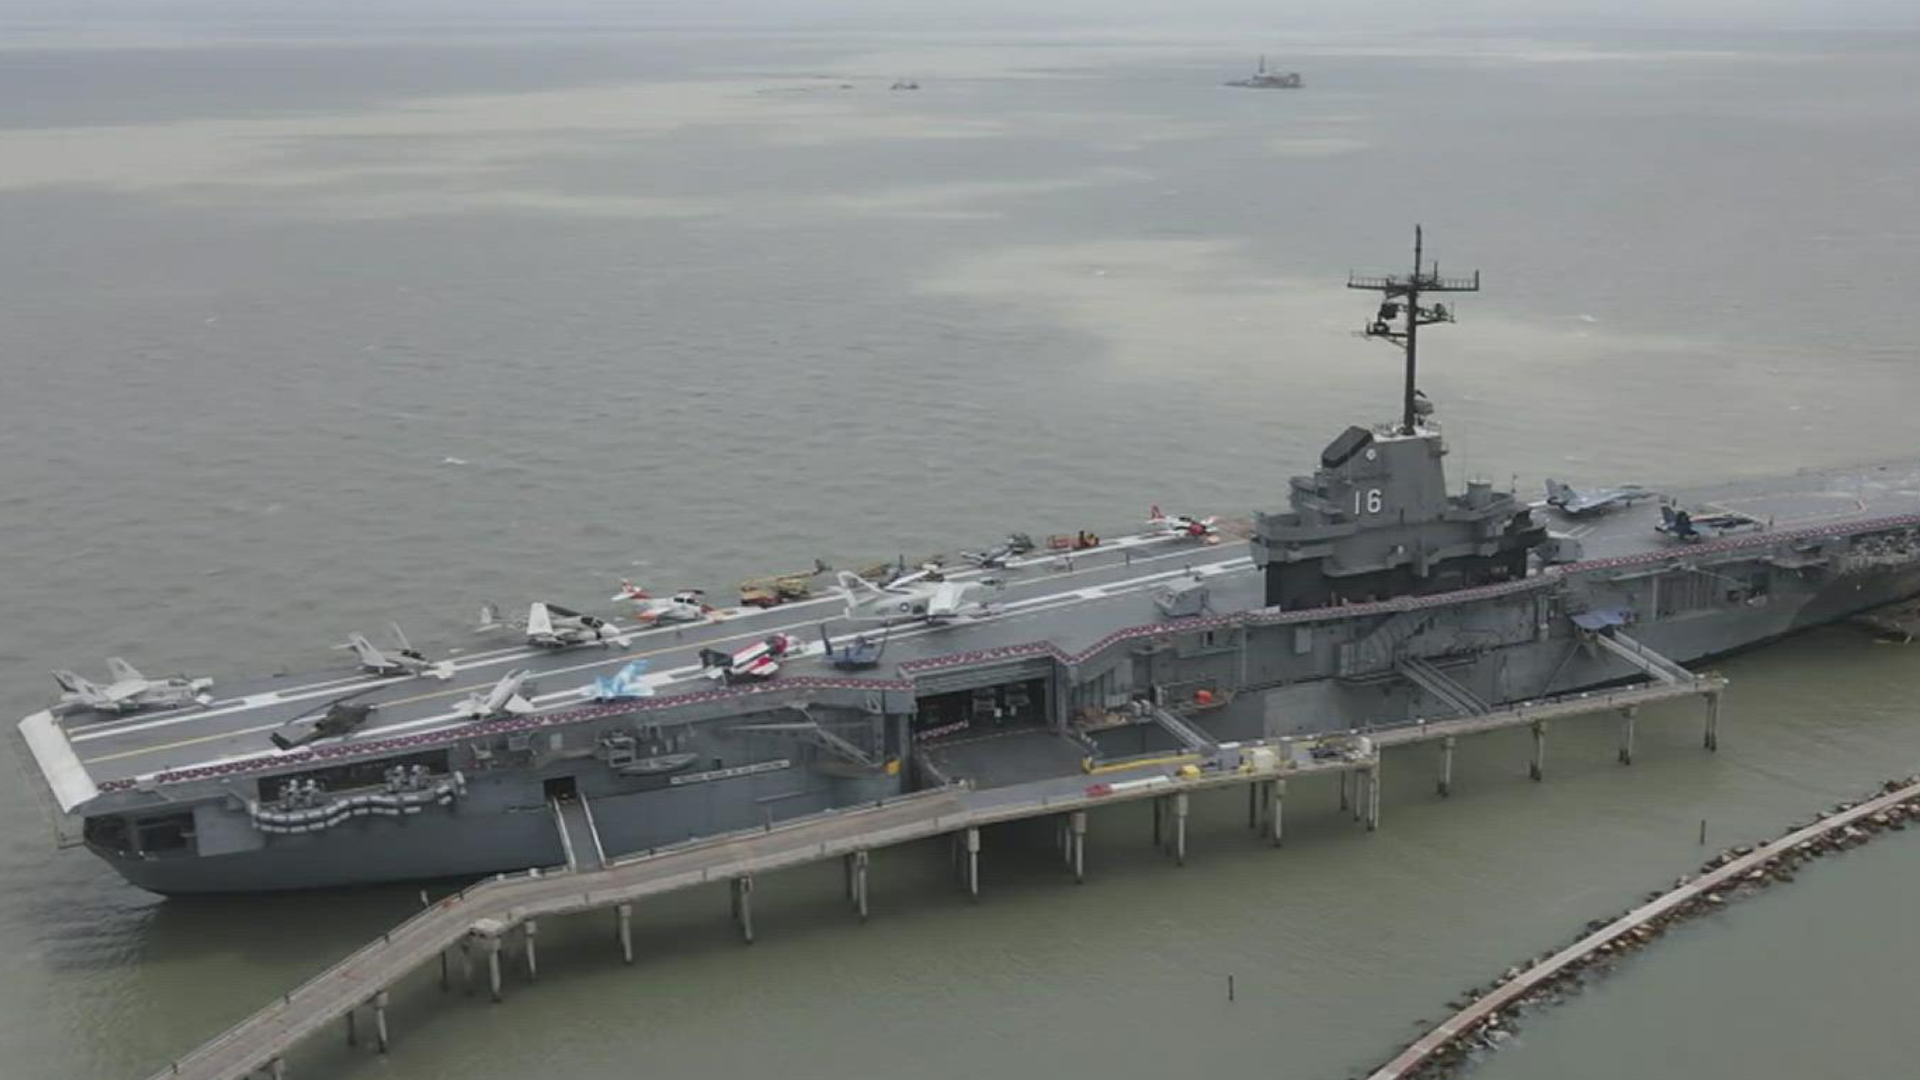 USS Lexington was commissioned on Feb. 17, 1943. This year, she celebrates her 80th birthday!